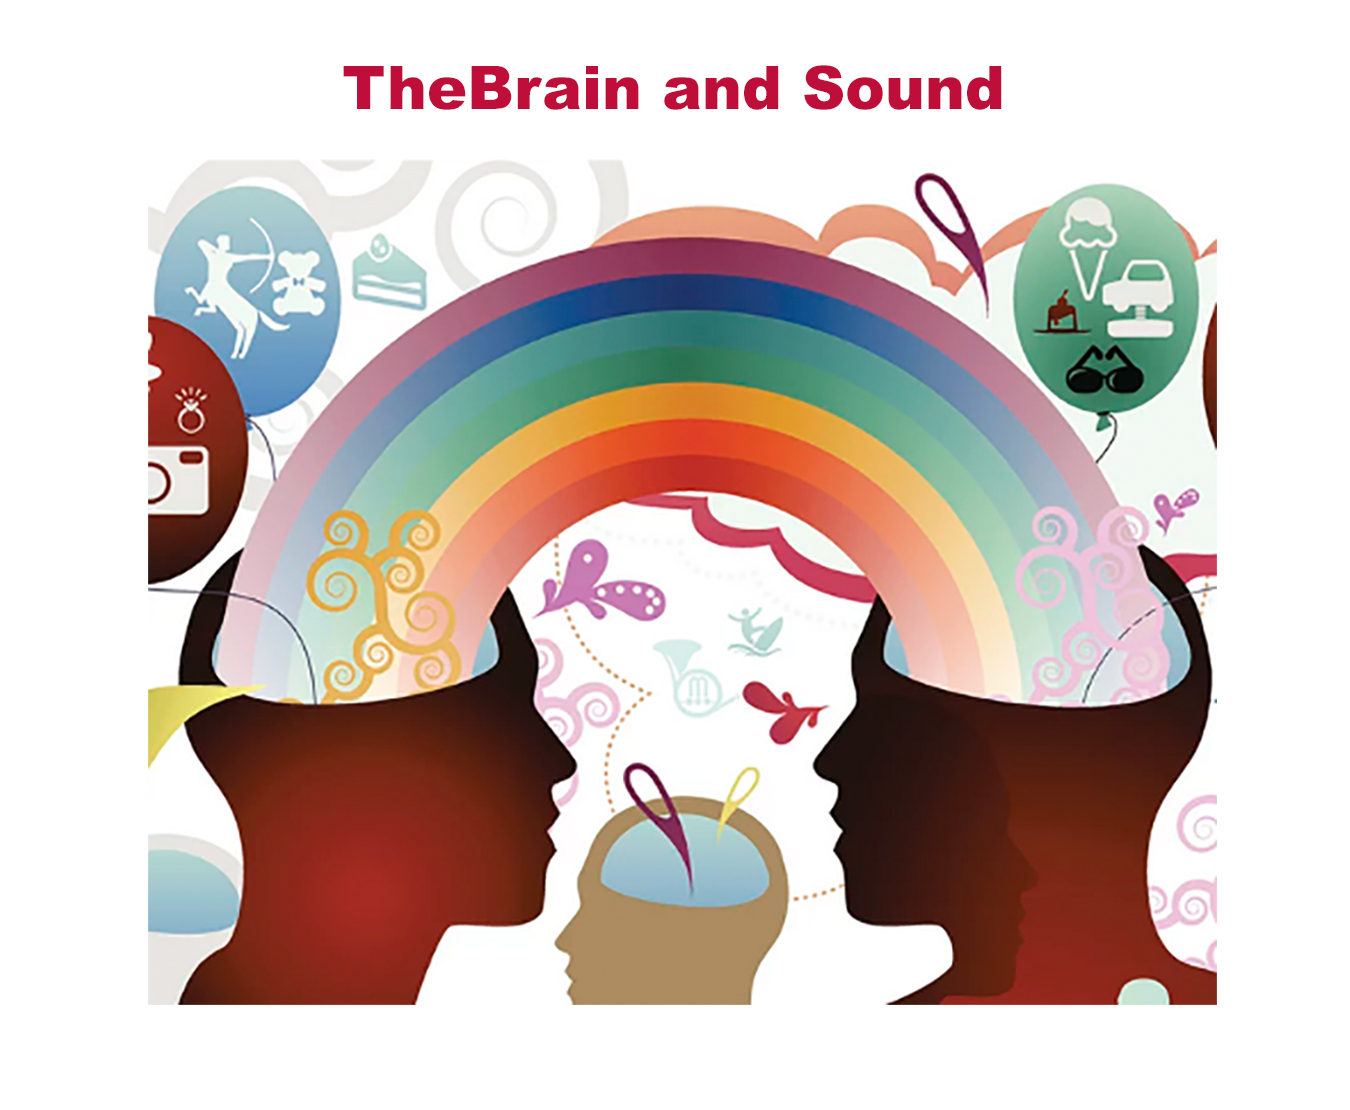 image shows colorful and whimsical representations of sound and human thought